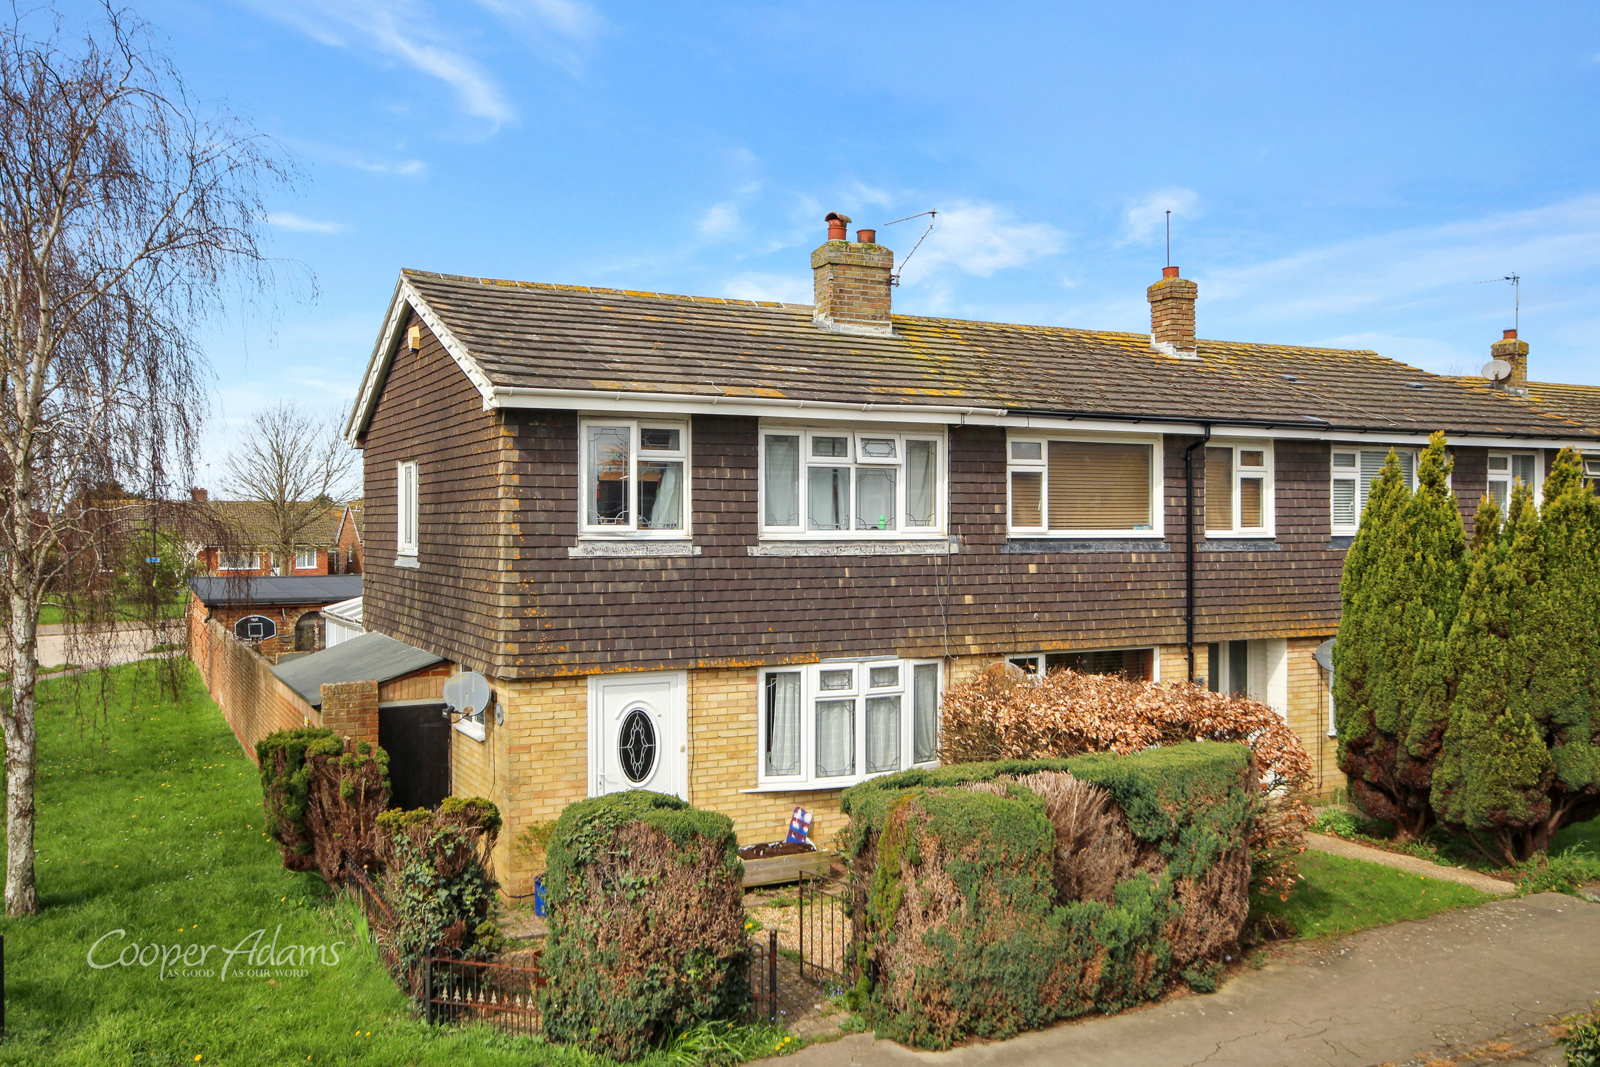 3 bed house for sale in Downs Way, East Preston - Property Image 1